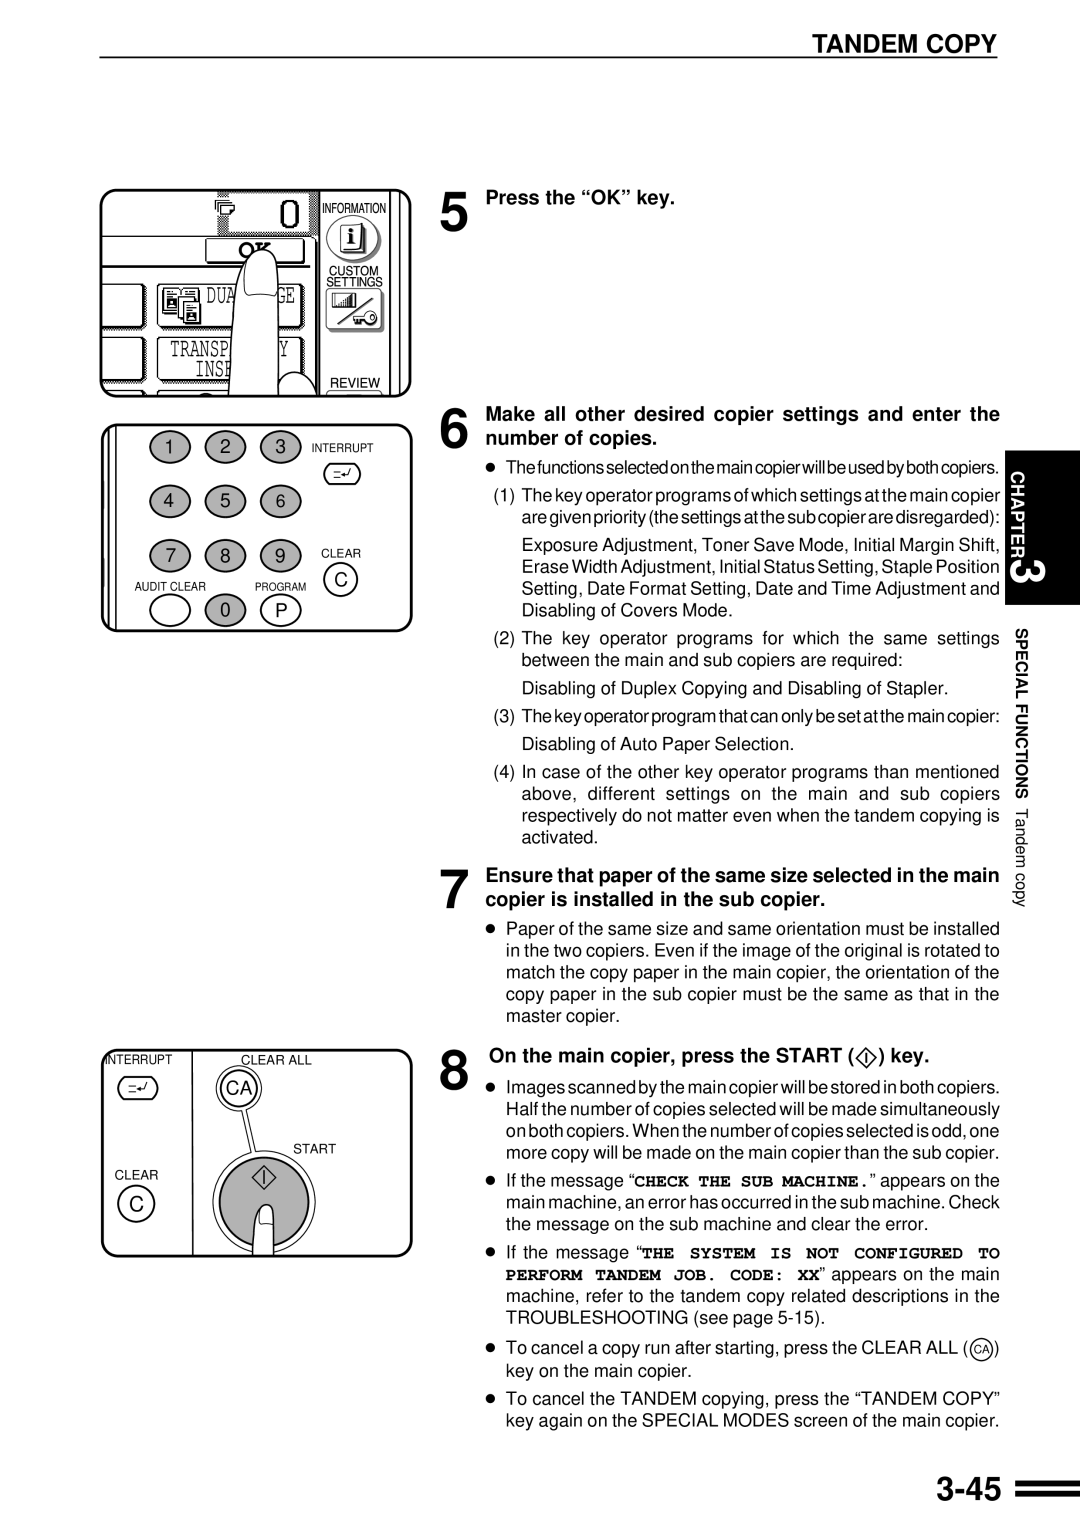 Sharp AR-507 operation manual 3-45, Dual Page Copy Transparency Inserts, Tandem Copy, Press the “OK” key, number of copies 